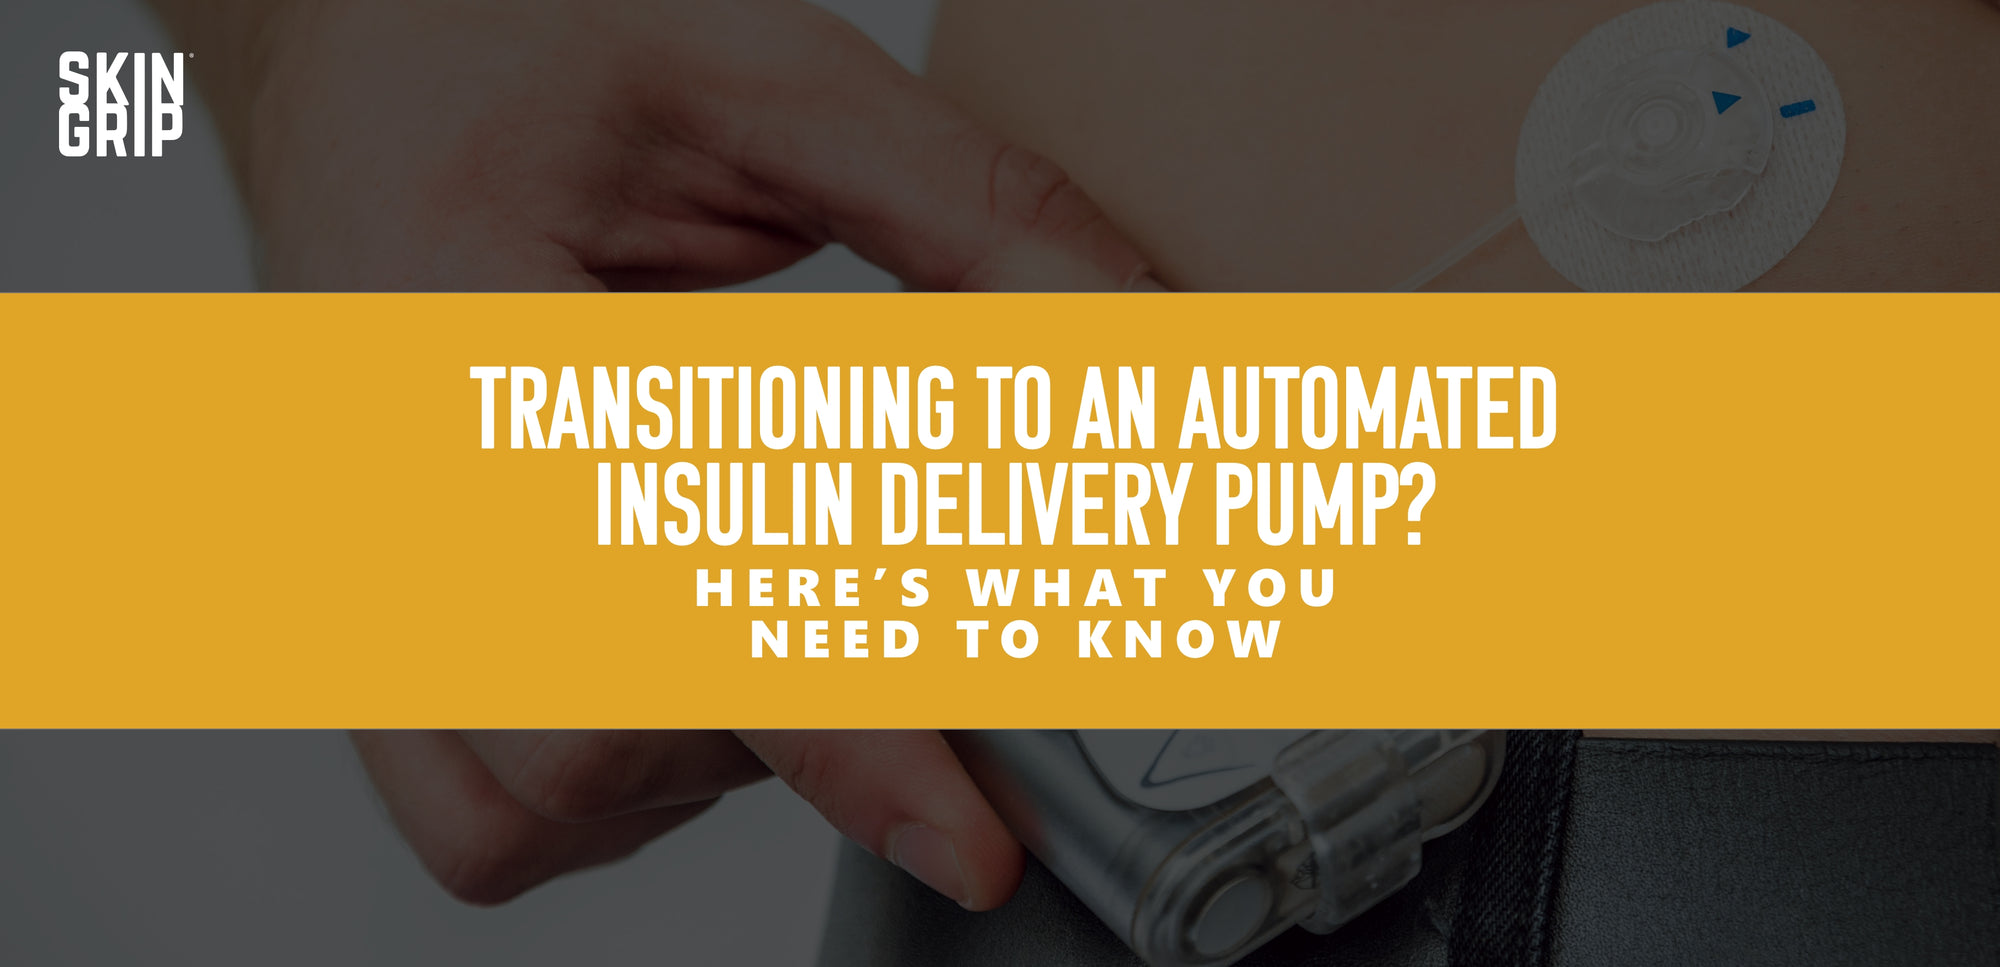 Transitioning to an Automated Insulin Delivery Pump?: Here’s What You Need to Know